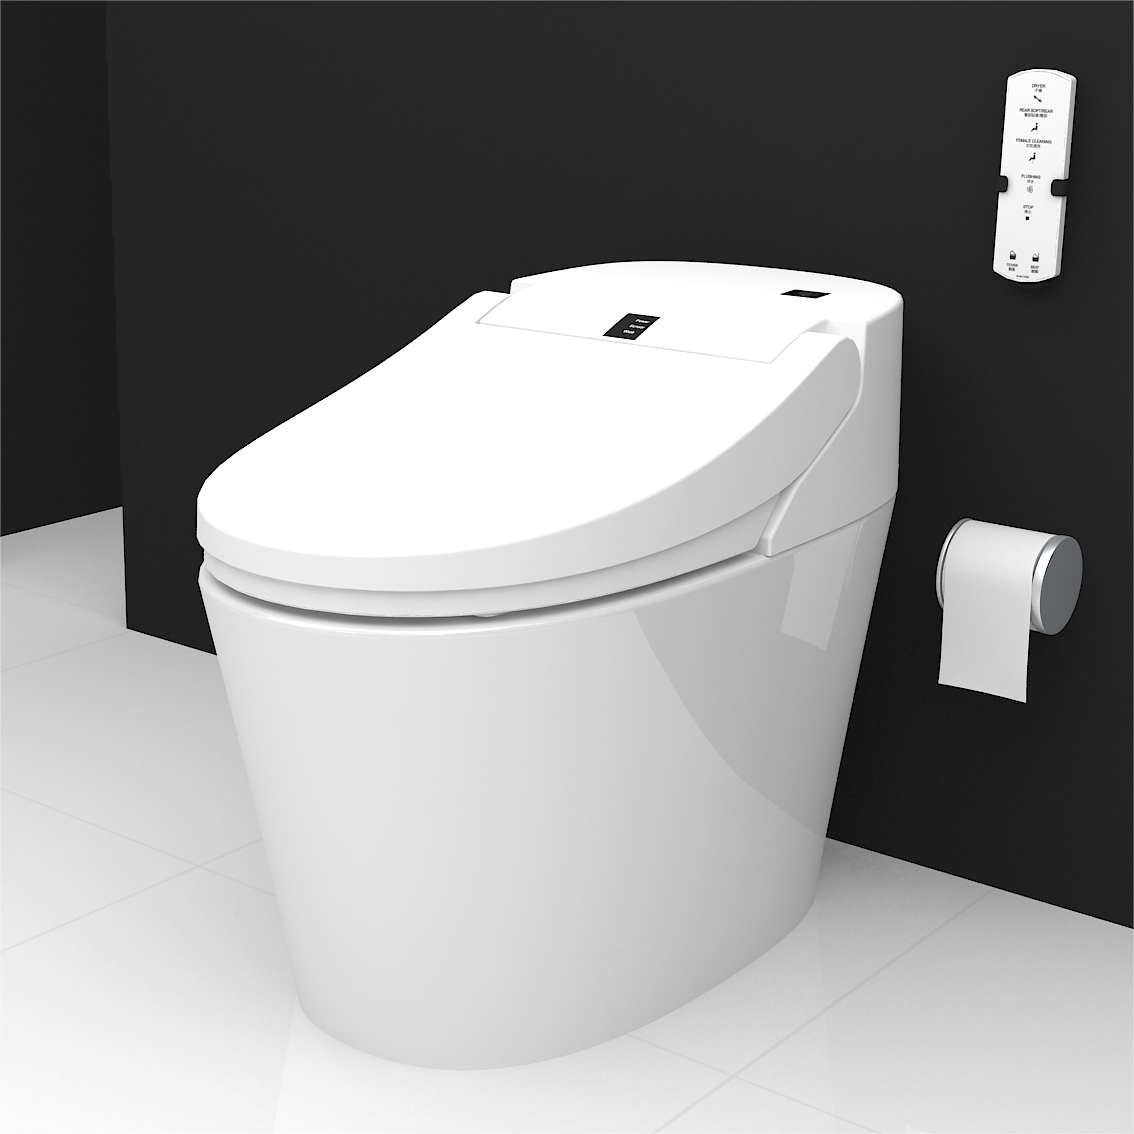 What is a smart toilet?